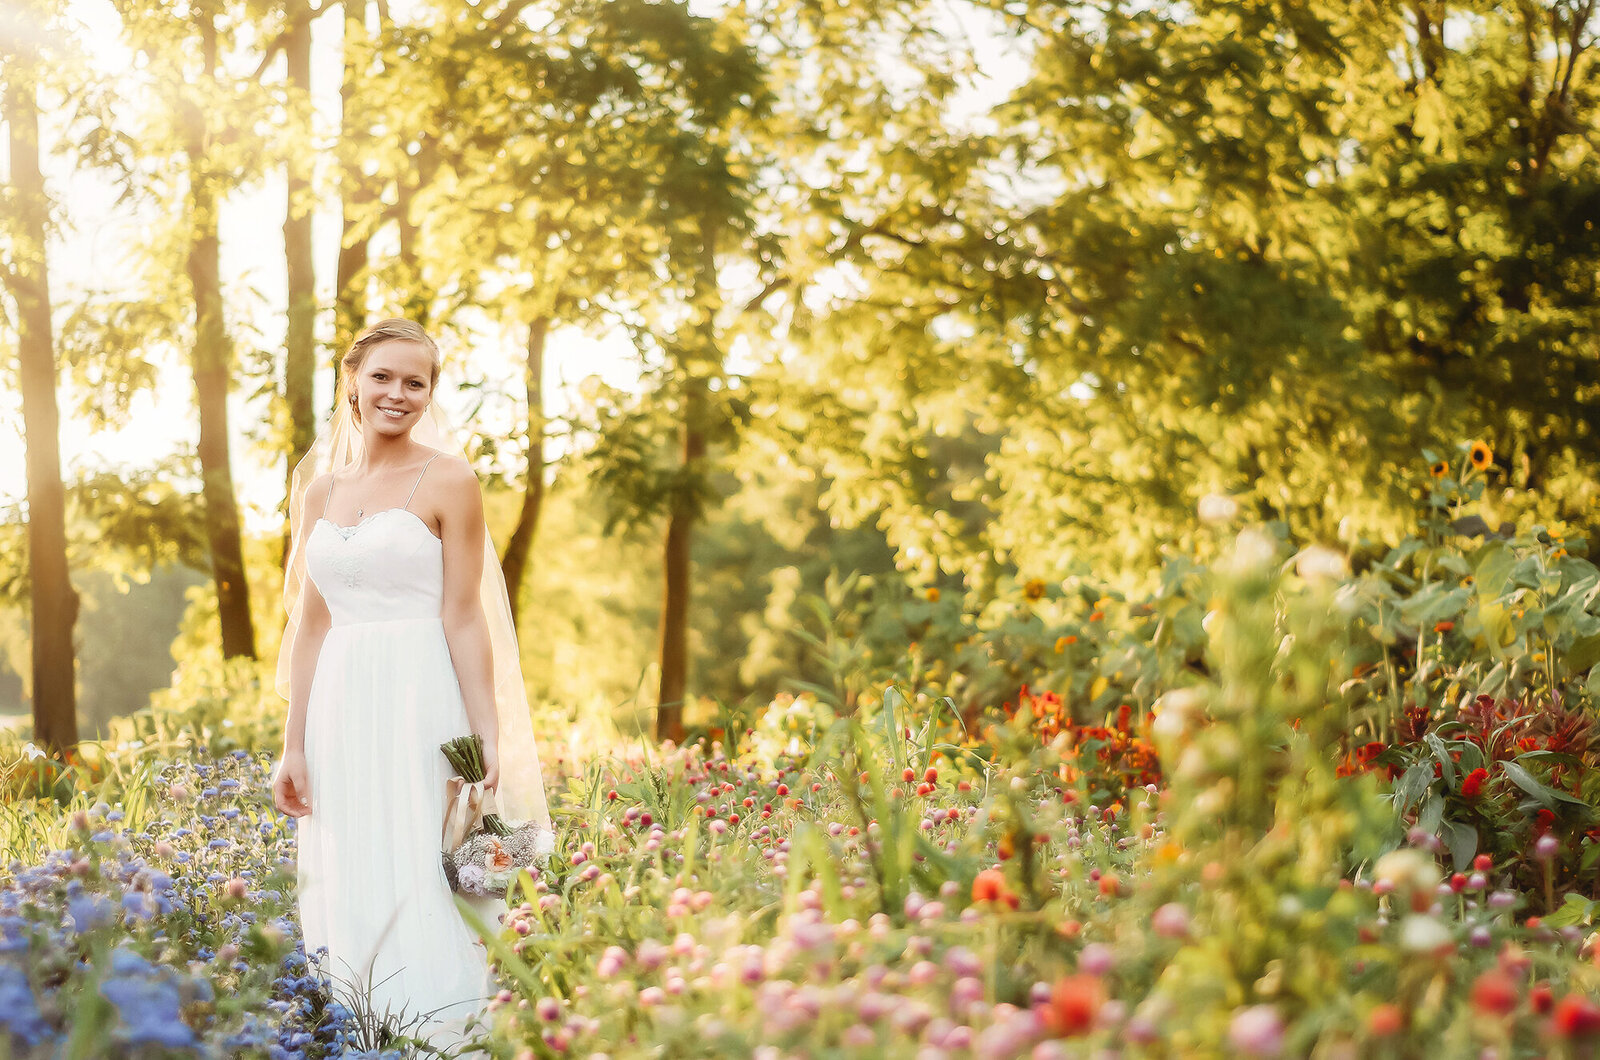 Bride poses for Bridal Portraits in a field of flowers in Asheville, NC.